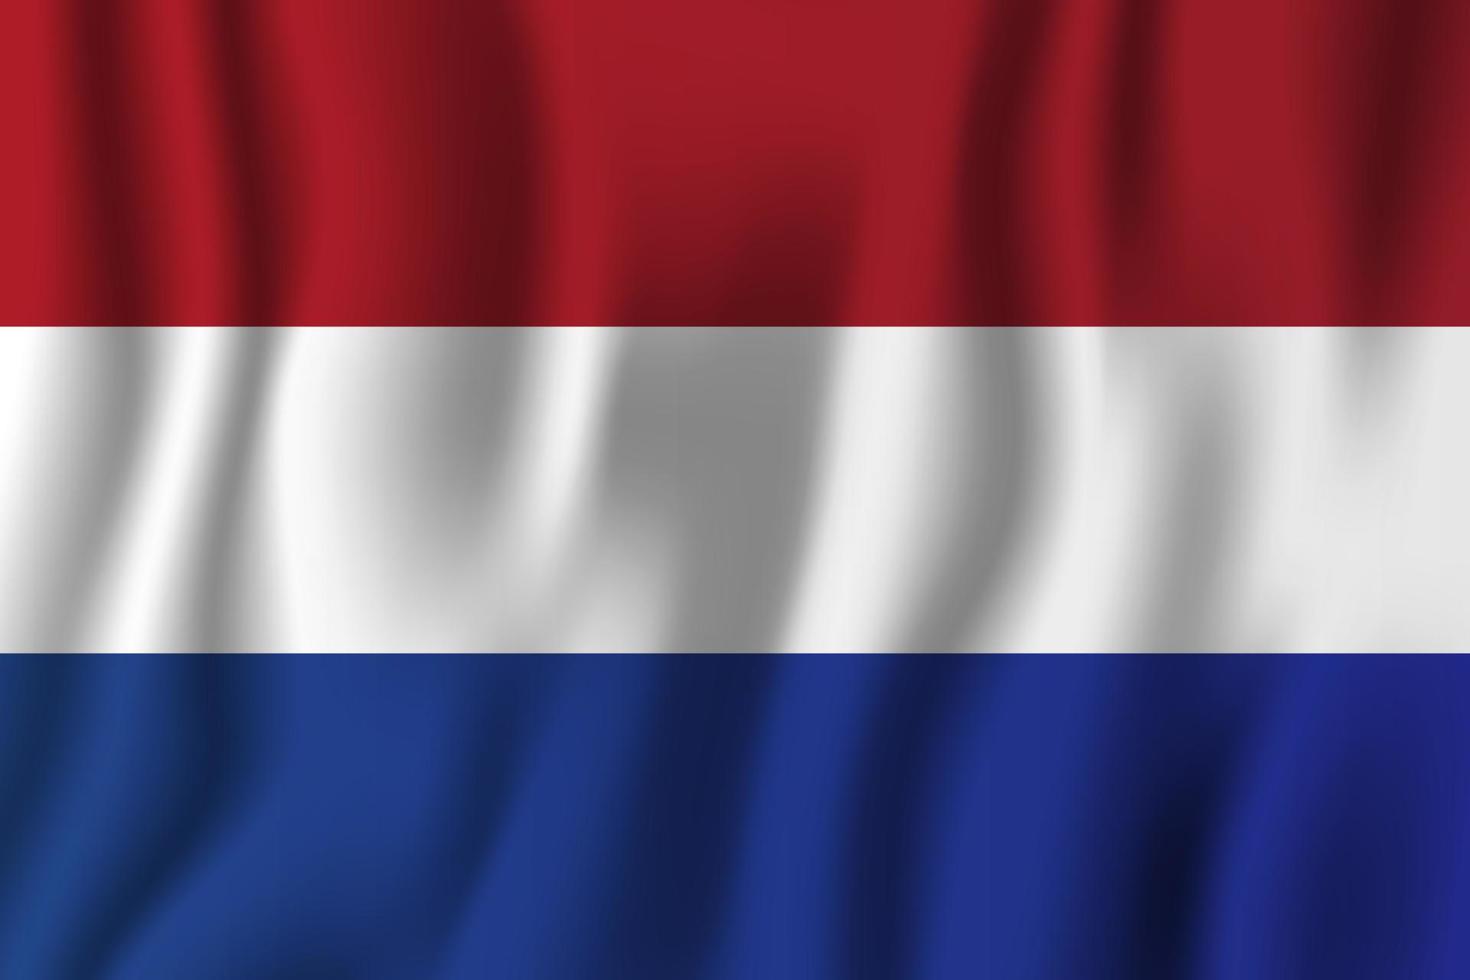 Netherlands realistic waving flag vector illustration. National country background symbol. Independence day